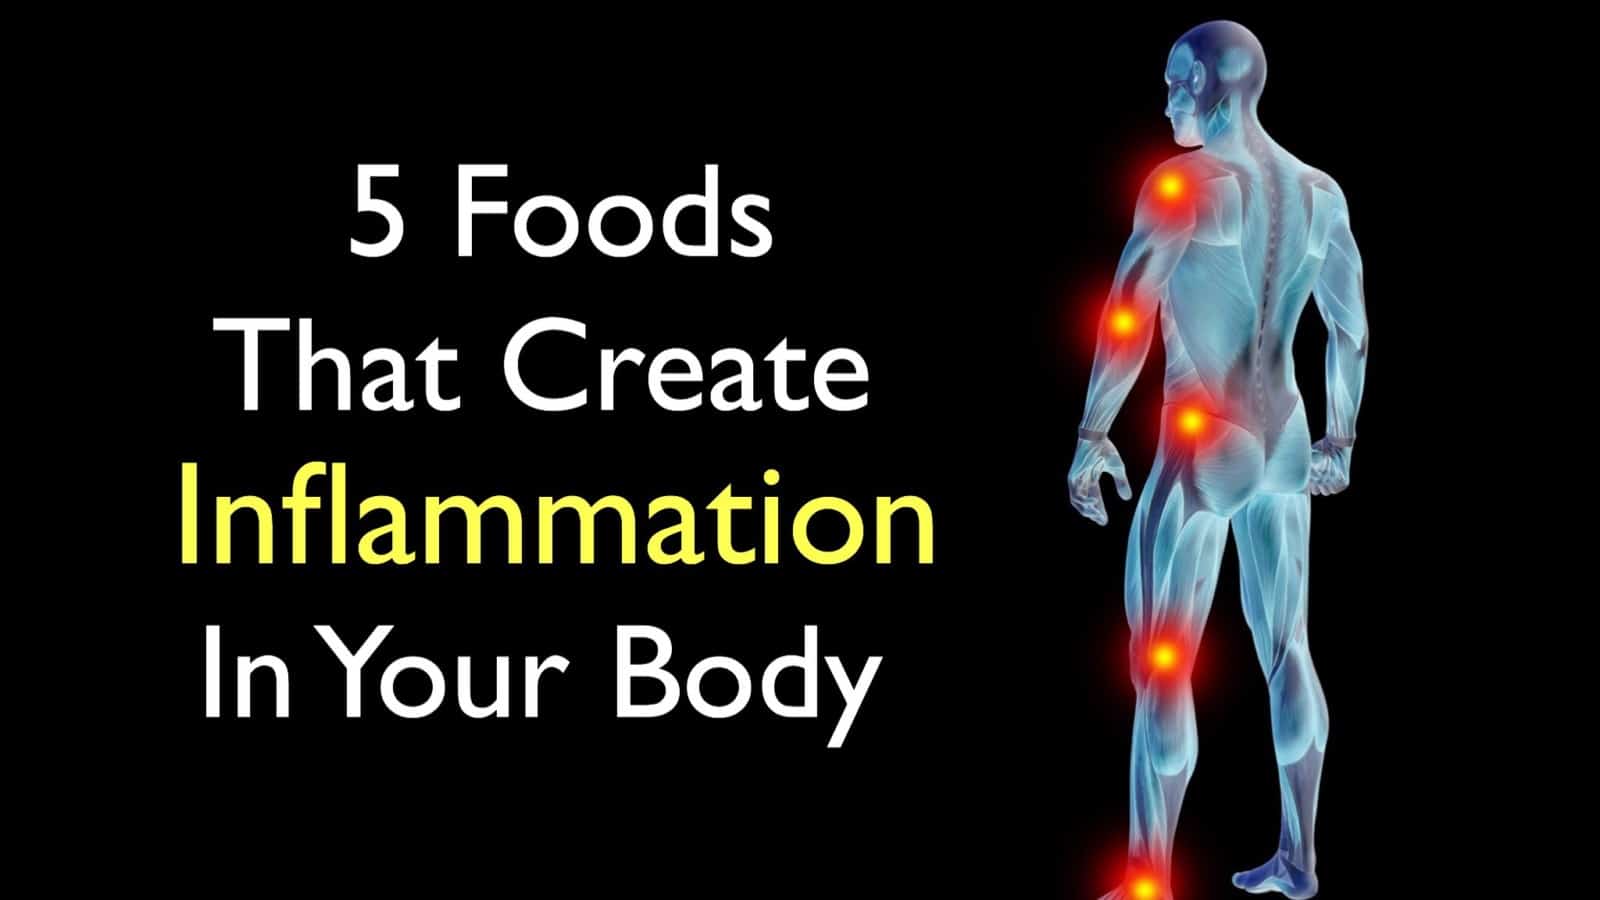 5 Foods That Create Inflammation In Your Body